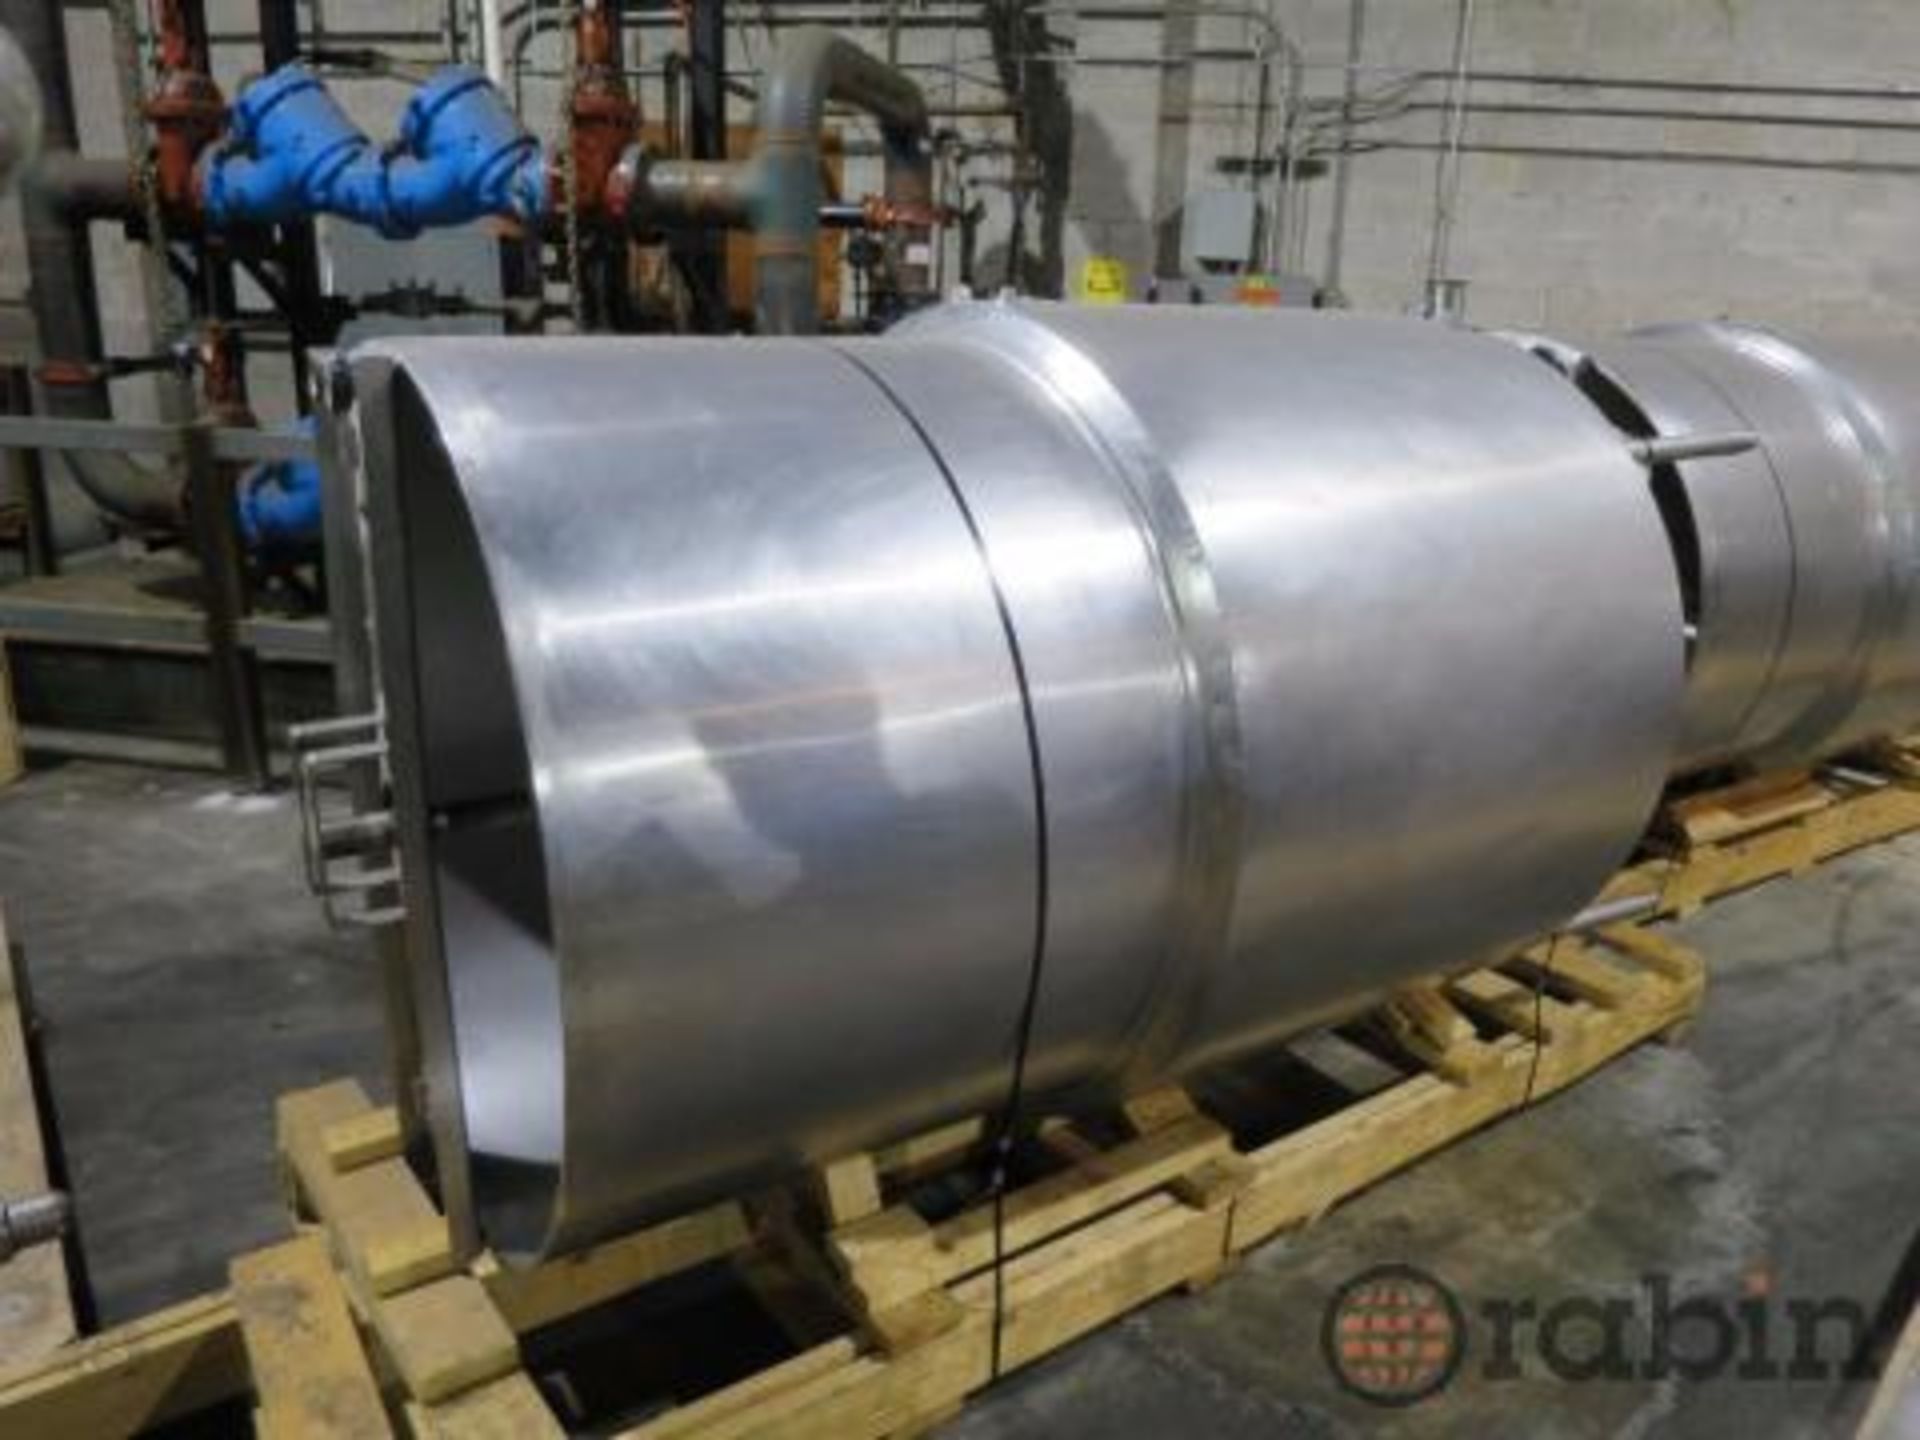 Groen stainless, fermenting tank, 470 gal., 54" dia x 82" st. wl., 50 % jacketed wall, SBD, 24"